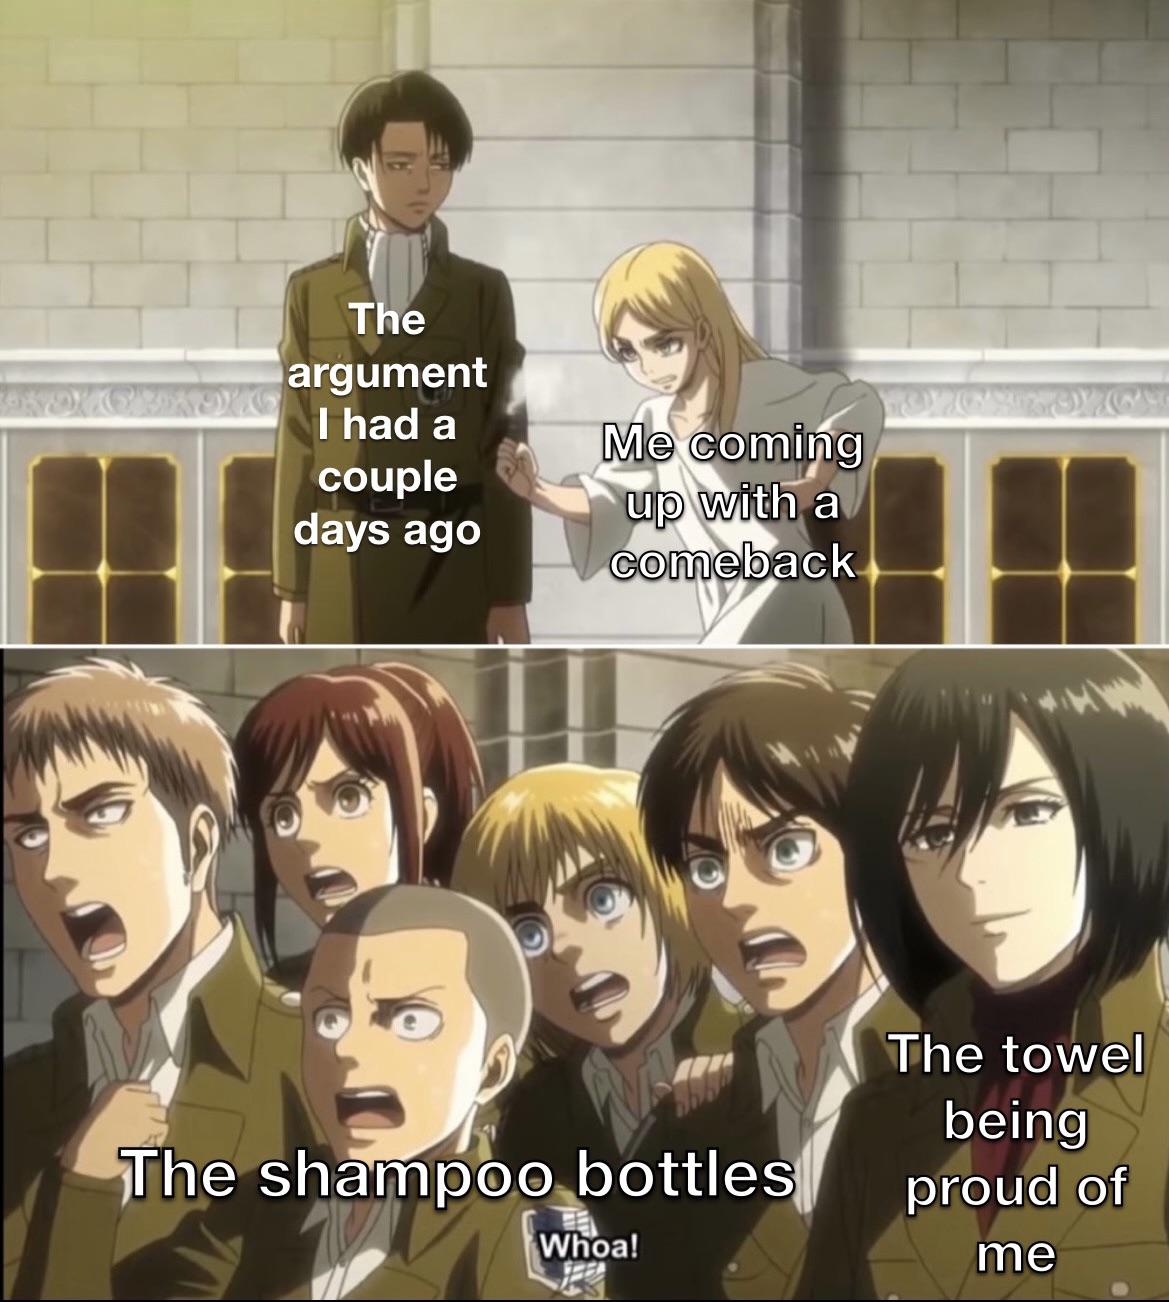 historia punch levi - The argument I had a couple days ago Me coming up with a comeback The shampoo bottles The towel being proud of me Whoa!